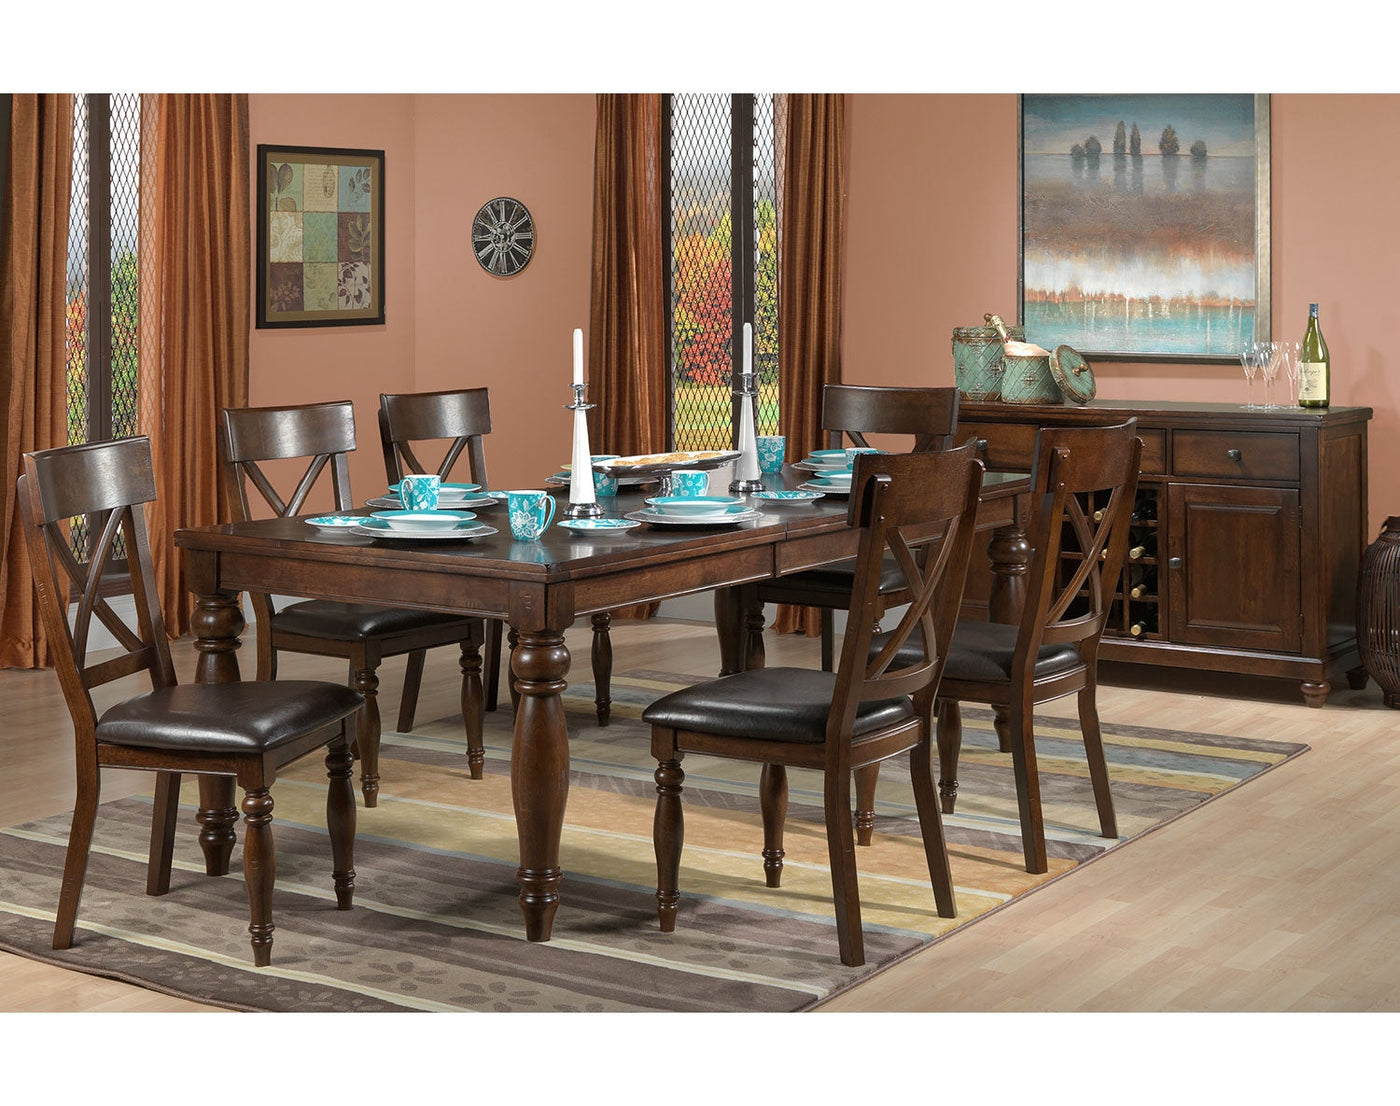 Kingstown Extendable Dining Table - Chocolate